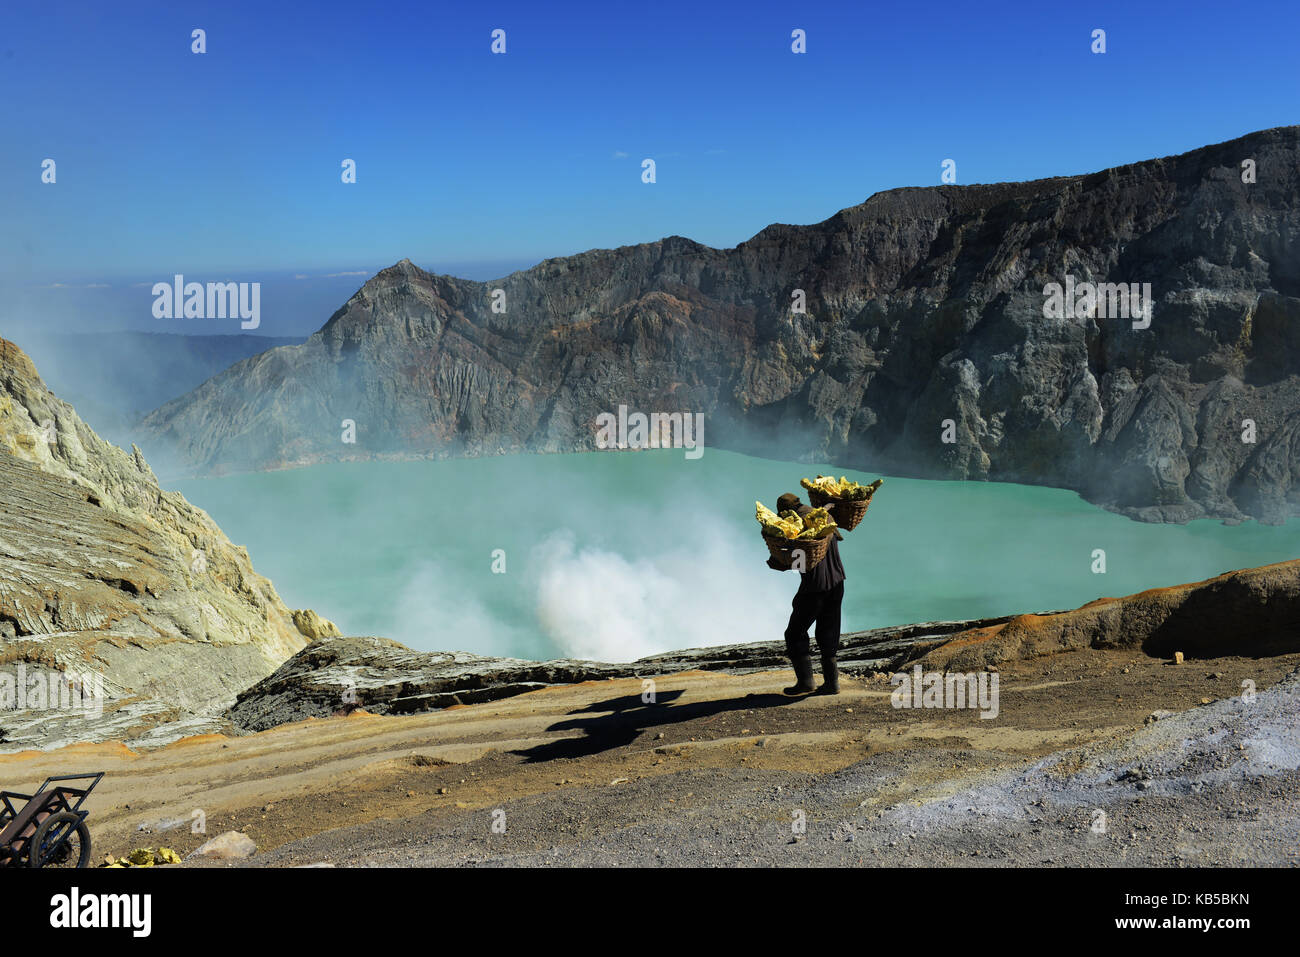 Sulfur miners carrying sulfur from the Ijen volcano crater. Stock Photo